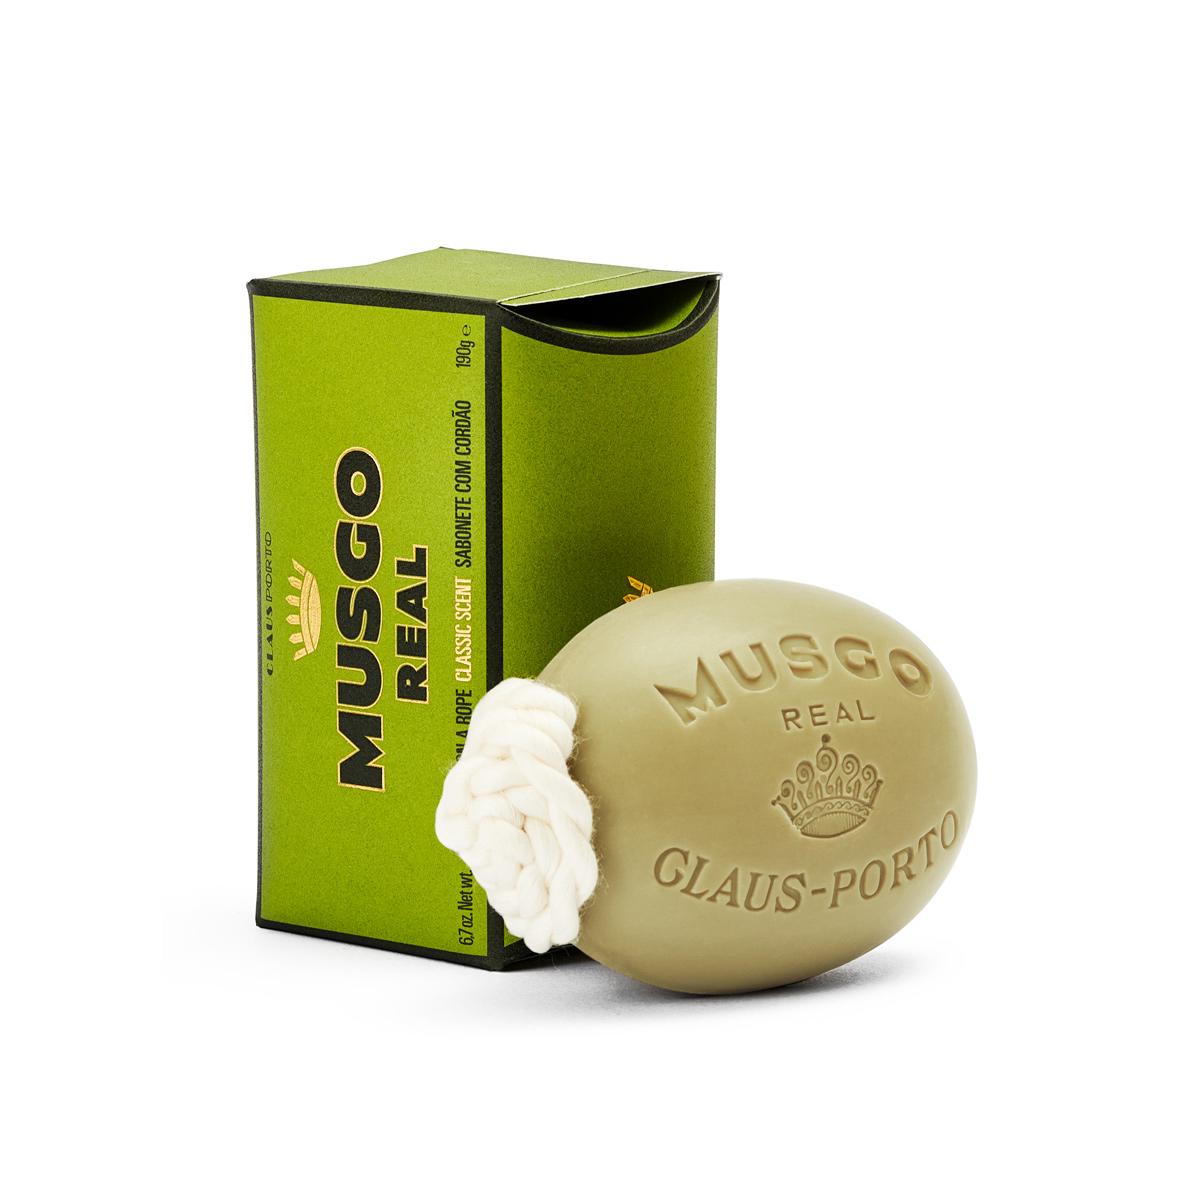 Musgo Real Soap on a Rope Classic Scent 190g